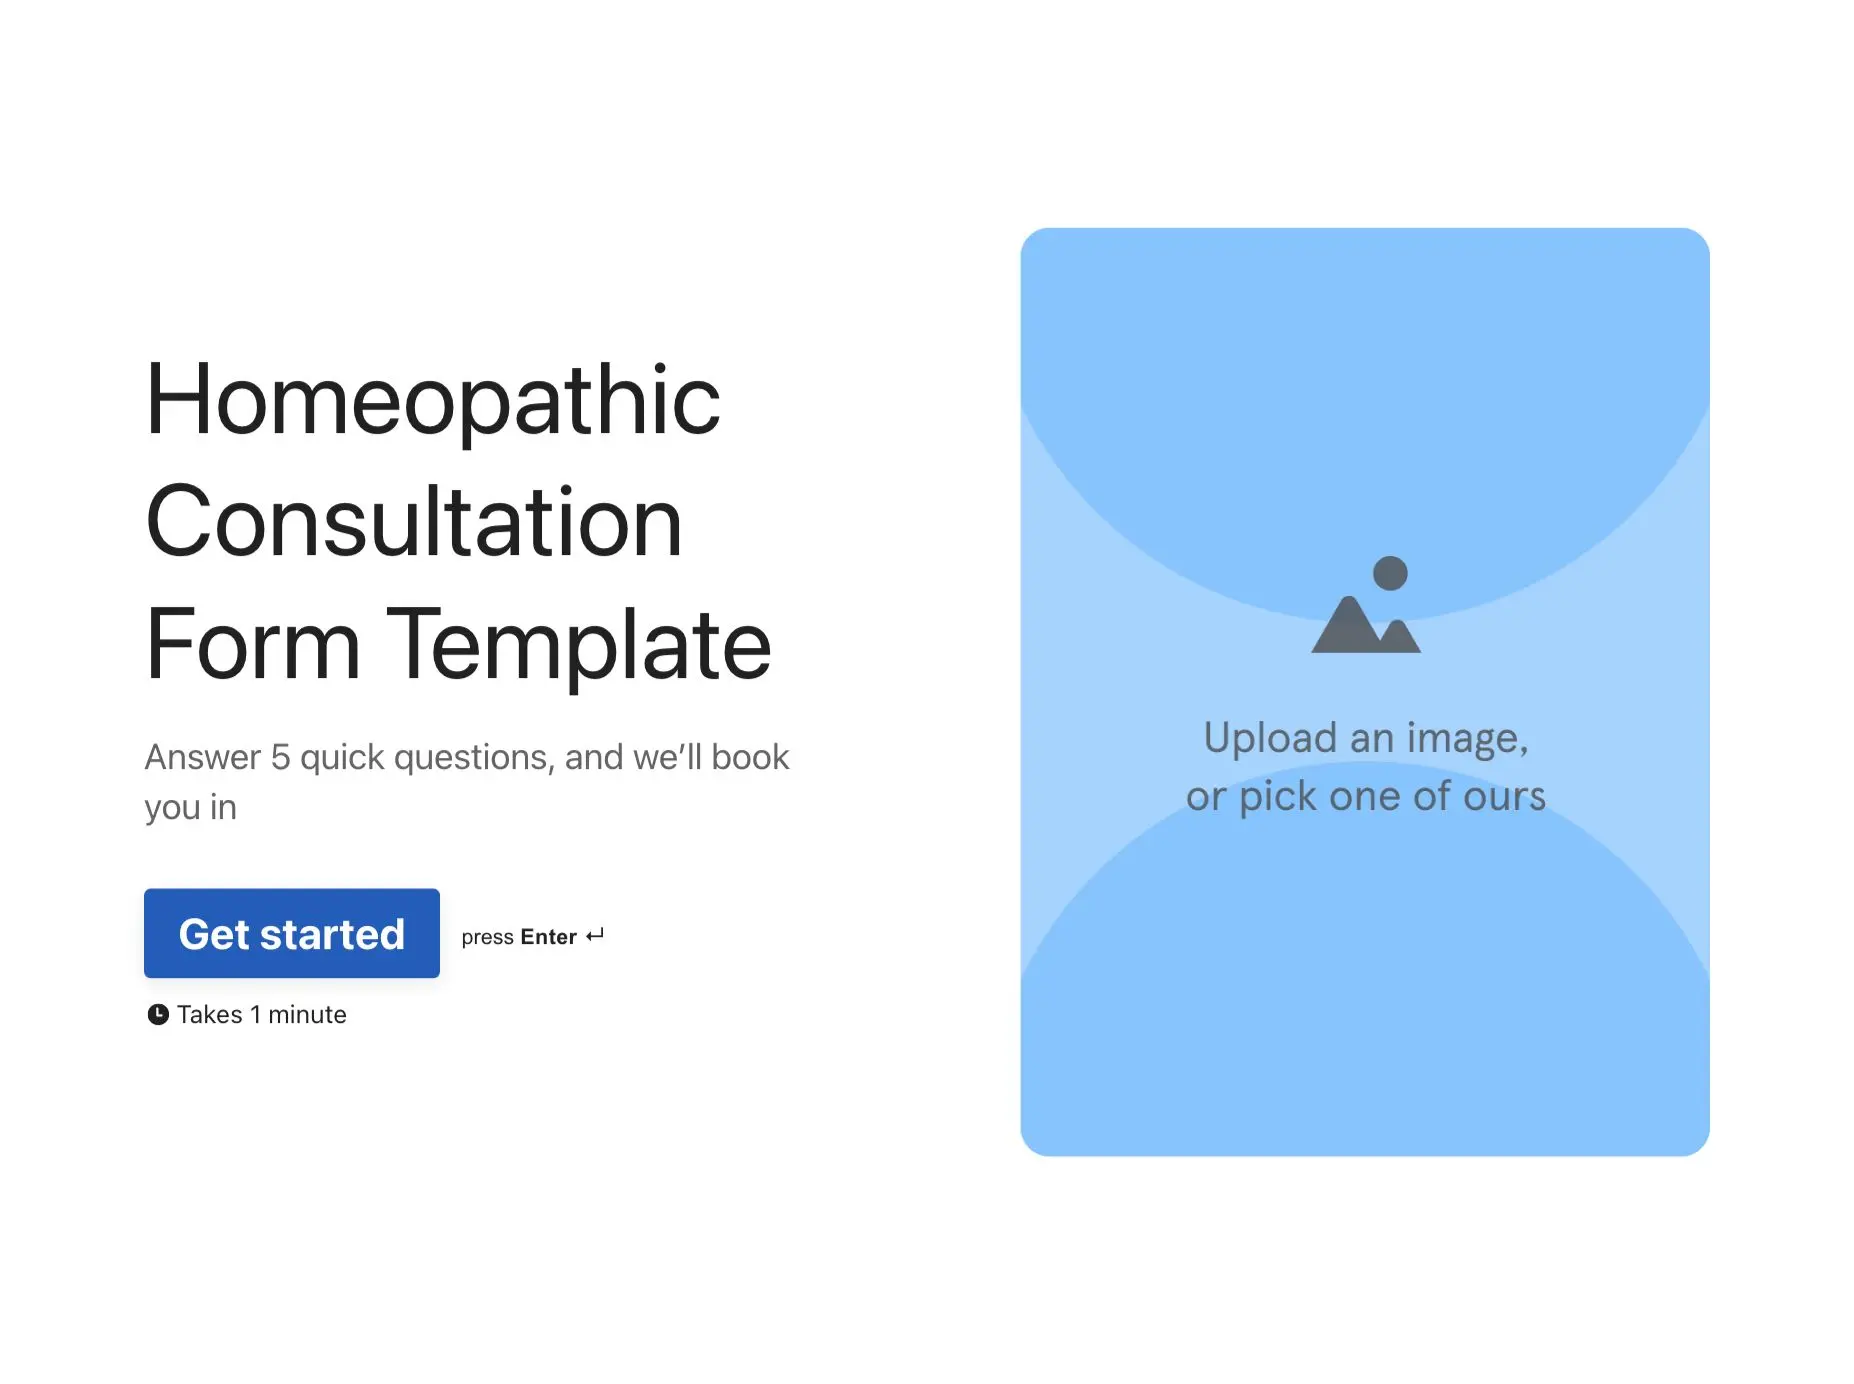 Homeopathic Consultation Form Template Hero